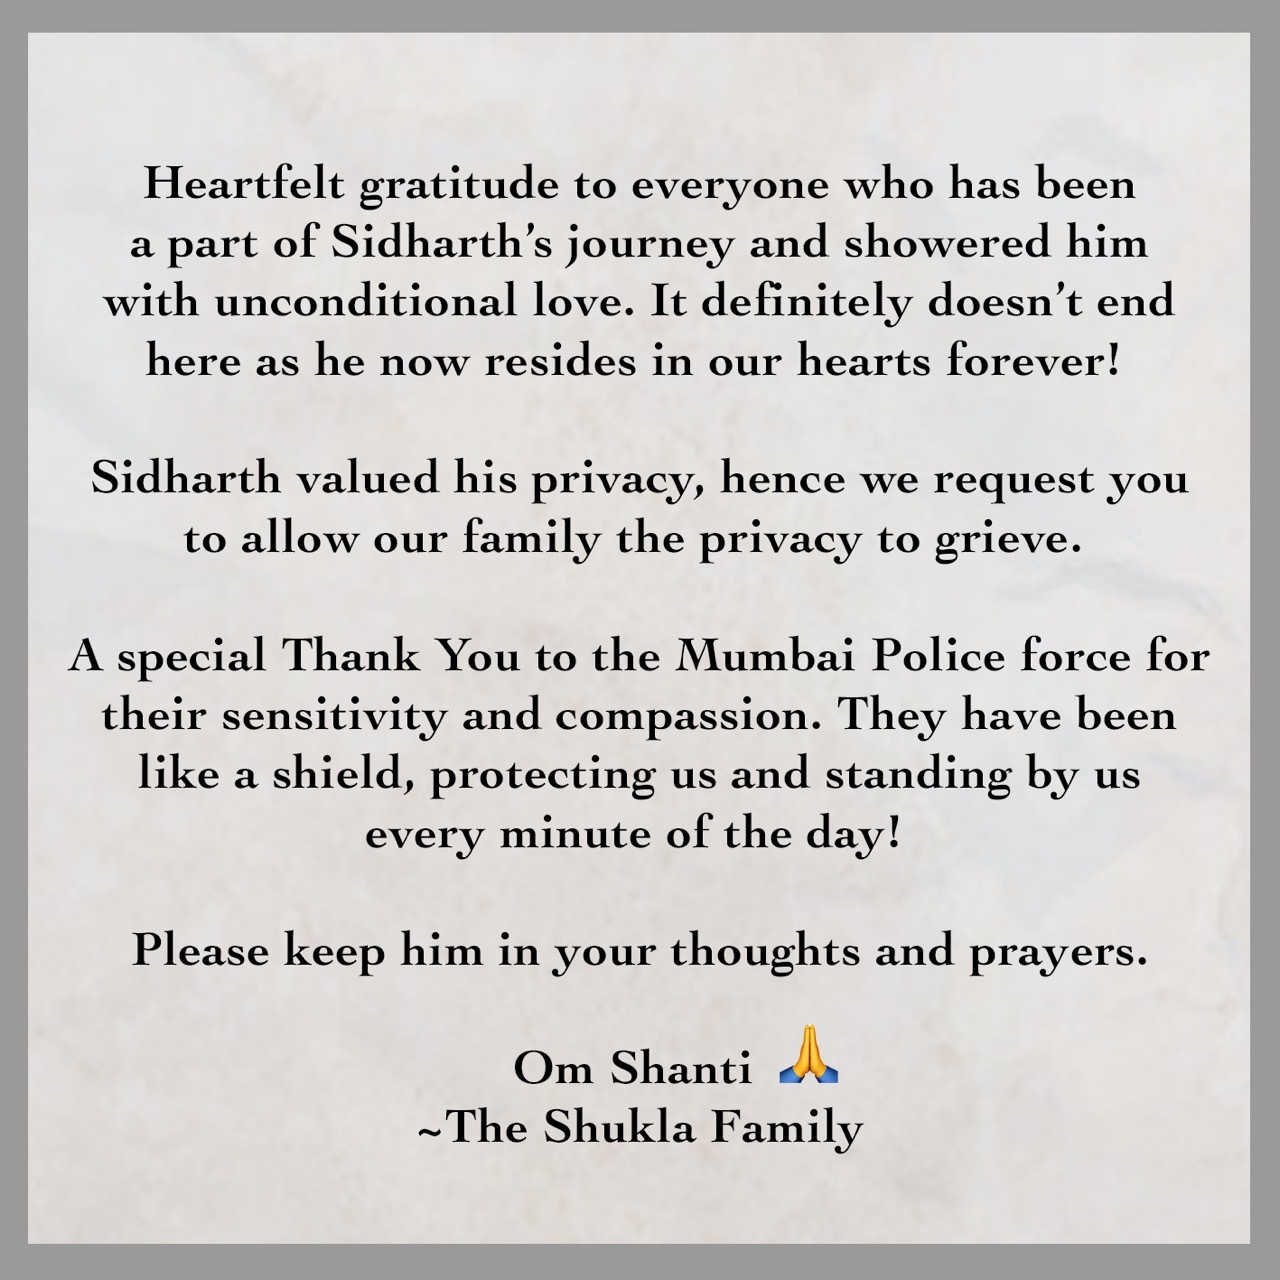 The statement issued by Sidharth Shukla’s family.